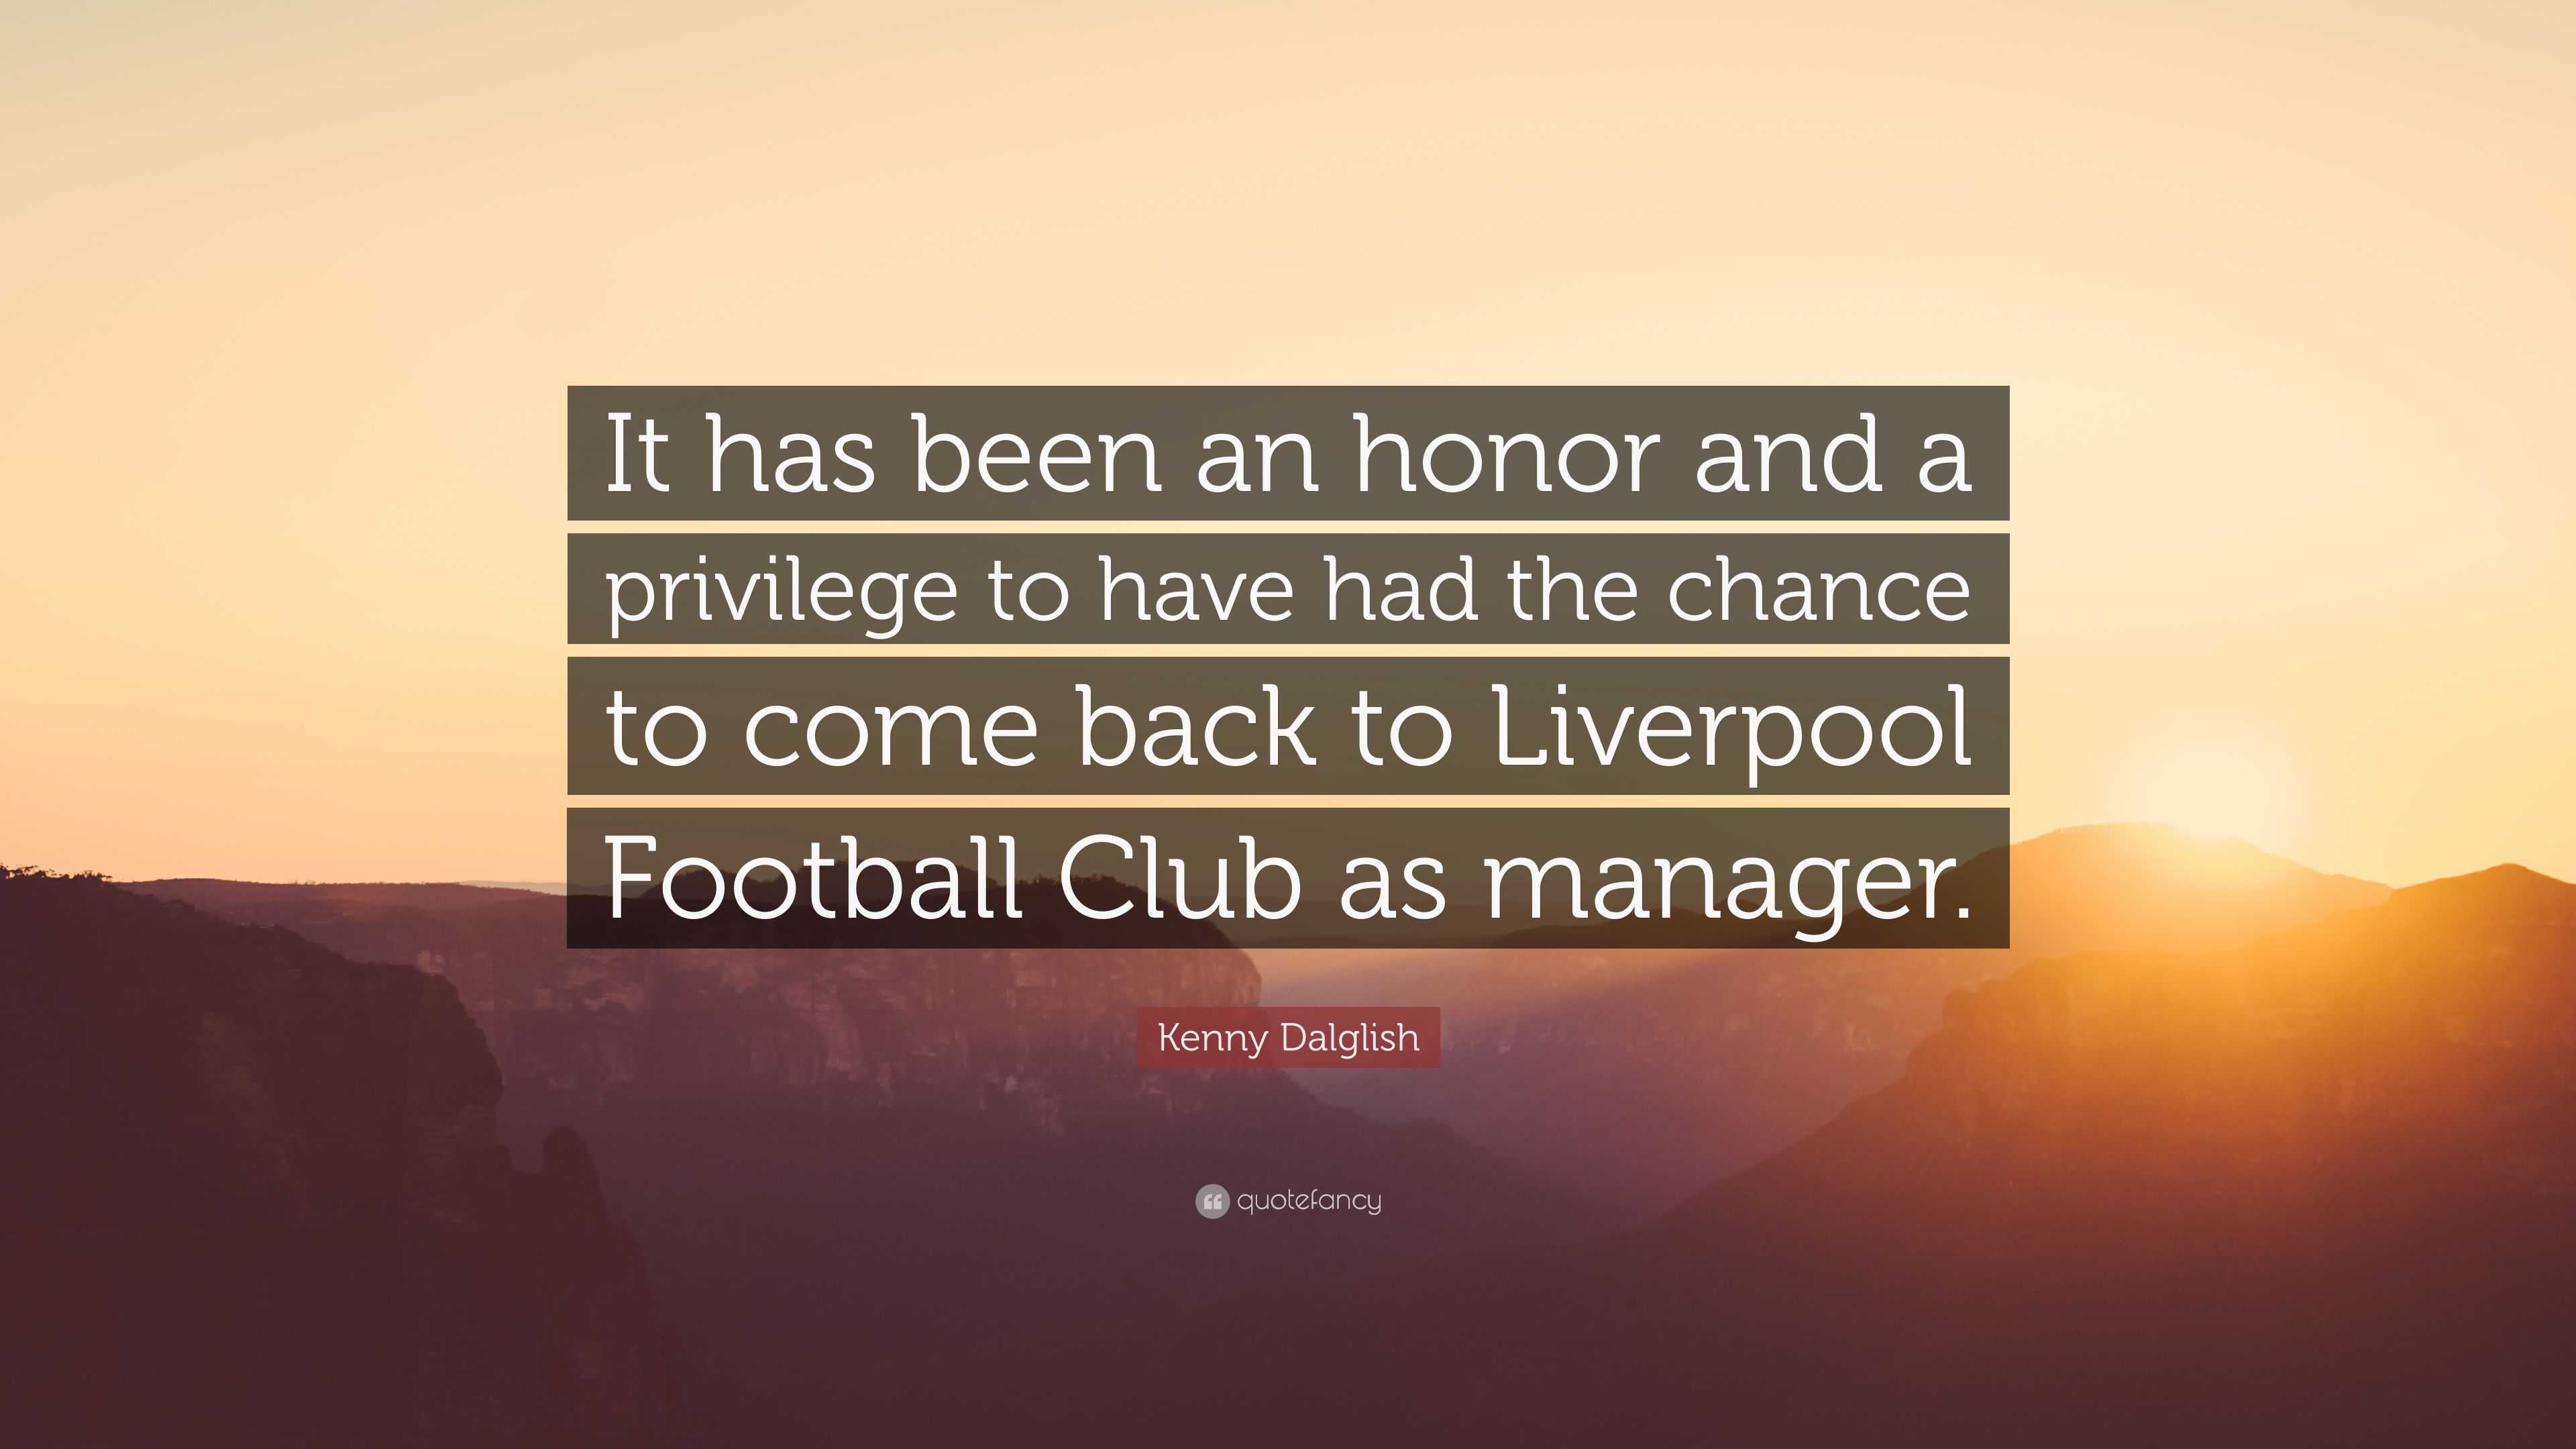 Kenny Dalglish Quote: “It has been an honor and a privilege to have had ...